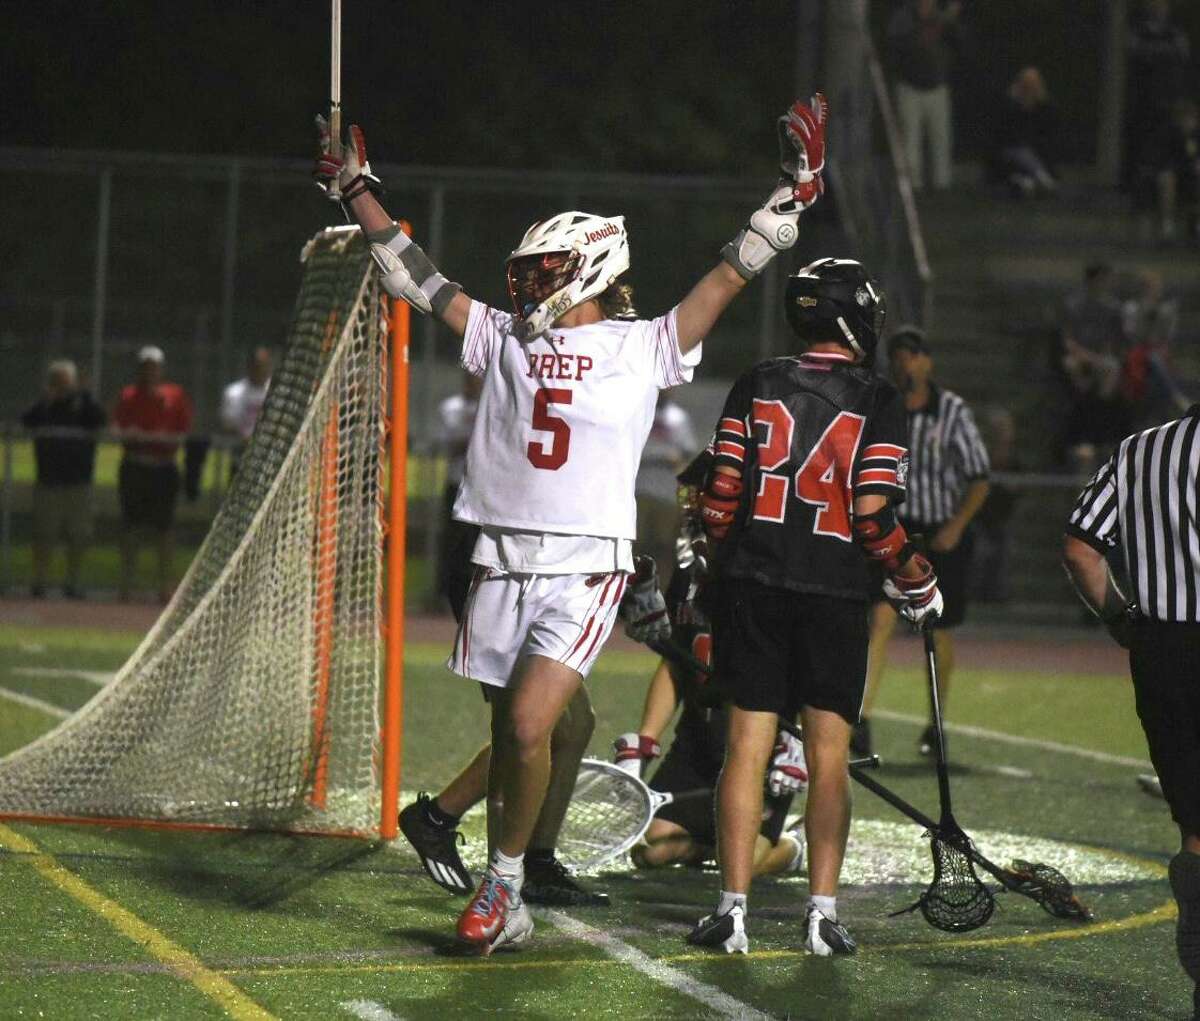 Fairfield Prep’s Luke Shannehan (5) celebrates a goal against Cheshire in the SCC boys lacrosse championship at Ken Strong Stadium in West Haven on Thursday.